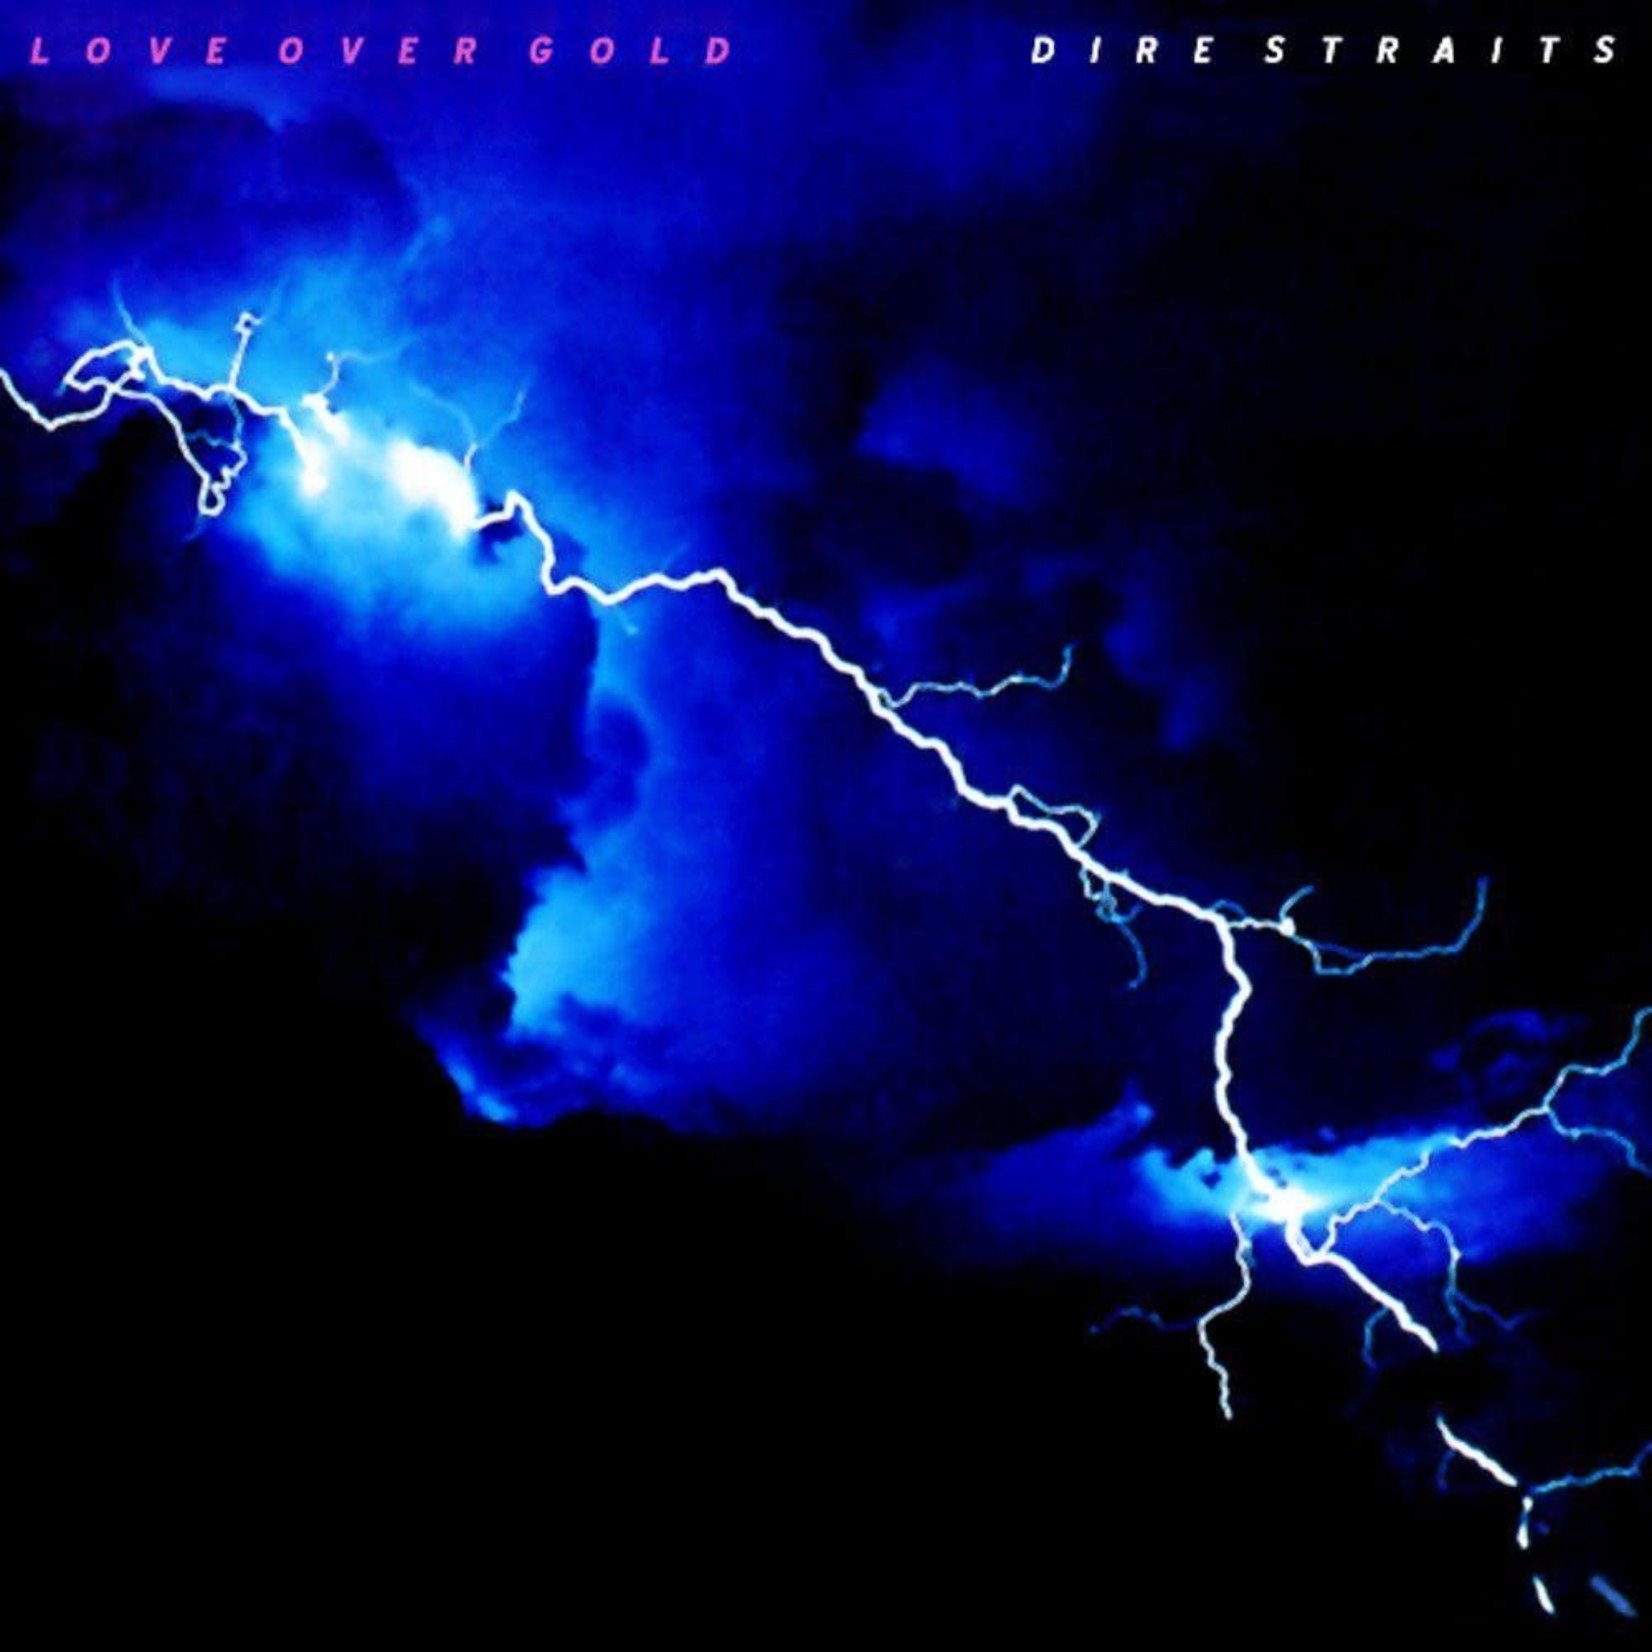 [New] Dire Straits - Love Over Gold